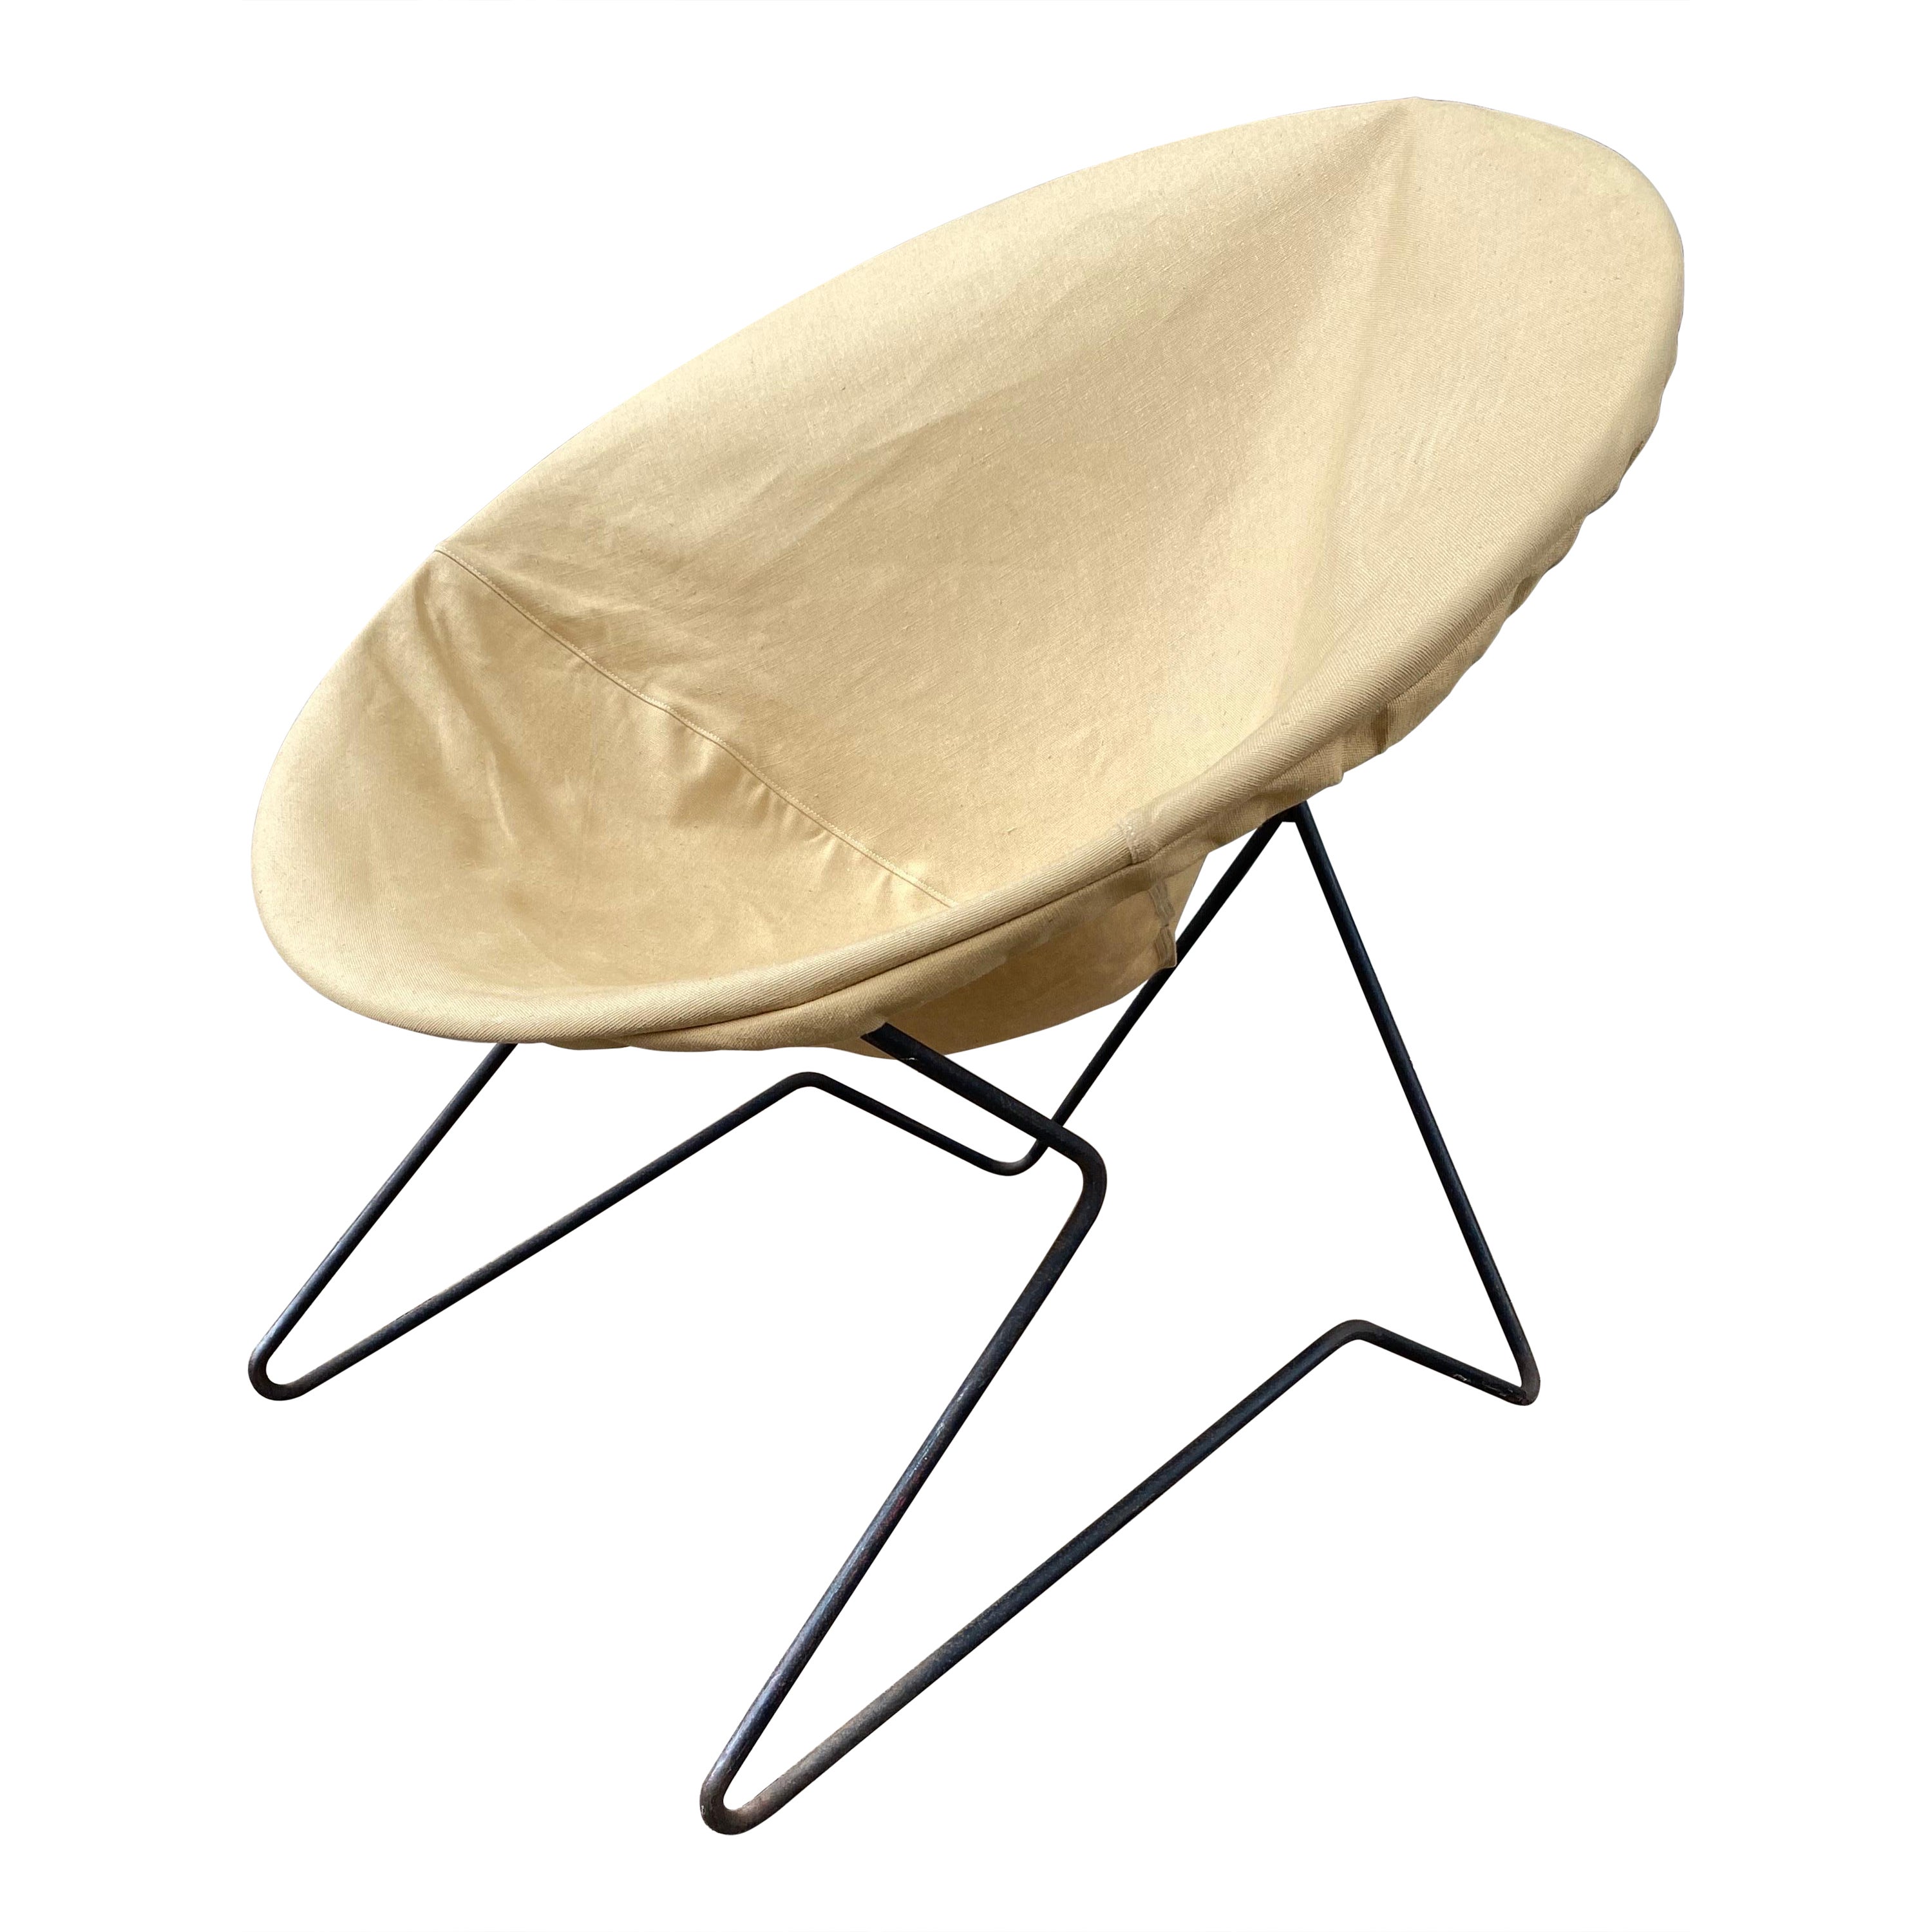 Circle Canvas Patio Chair For Sale